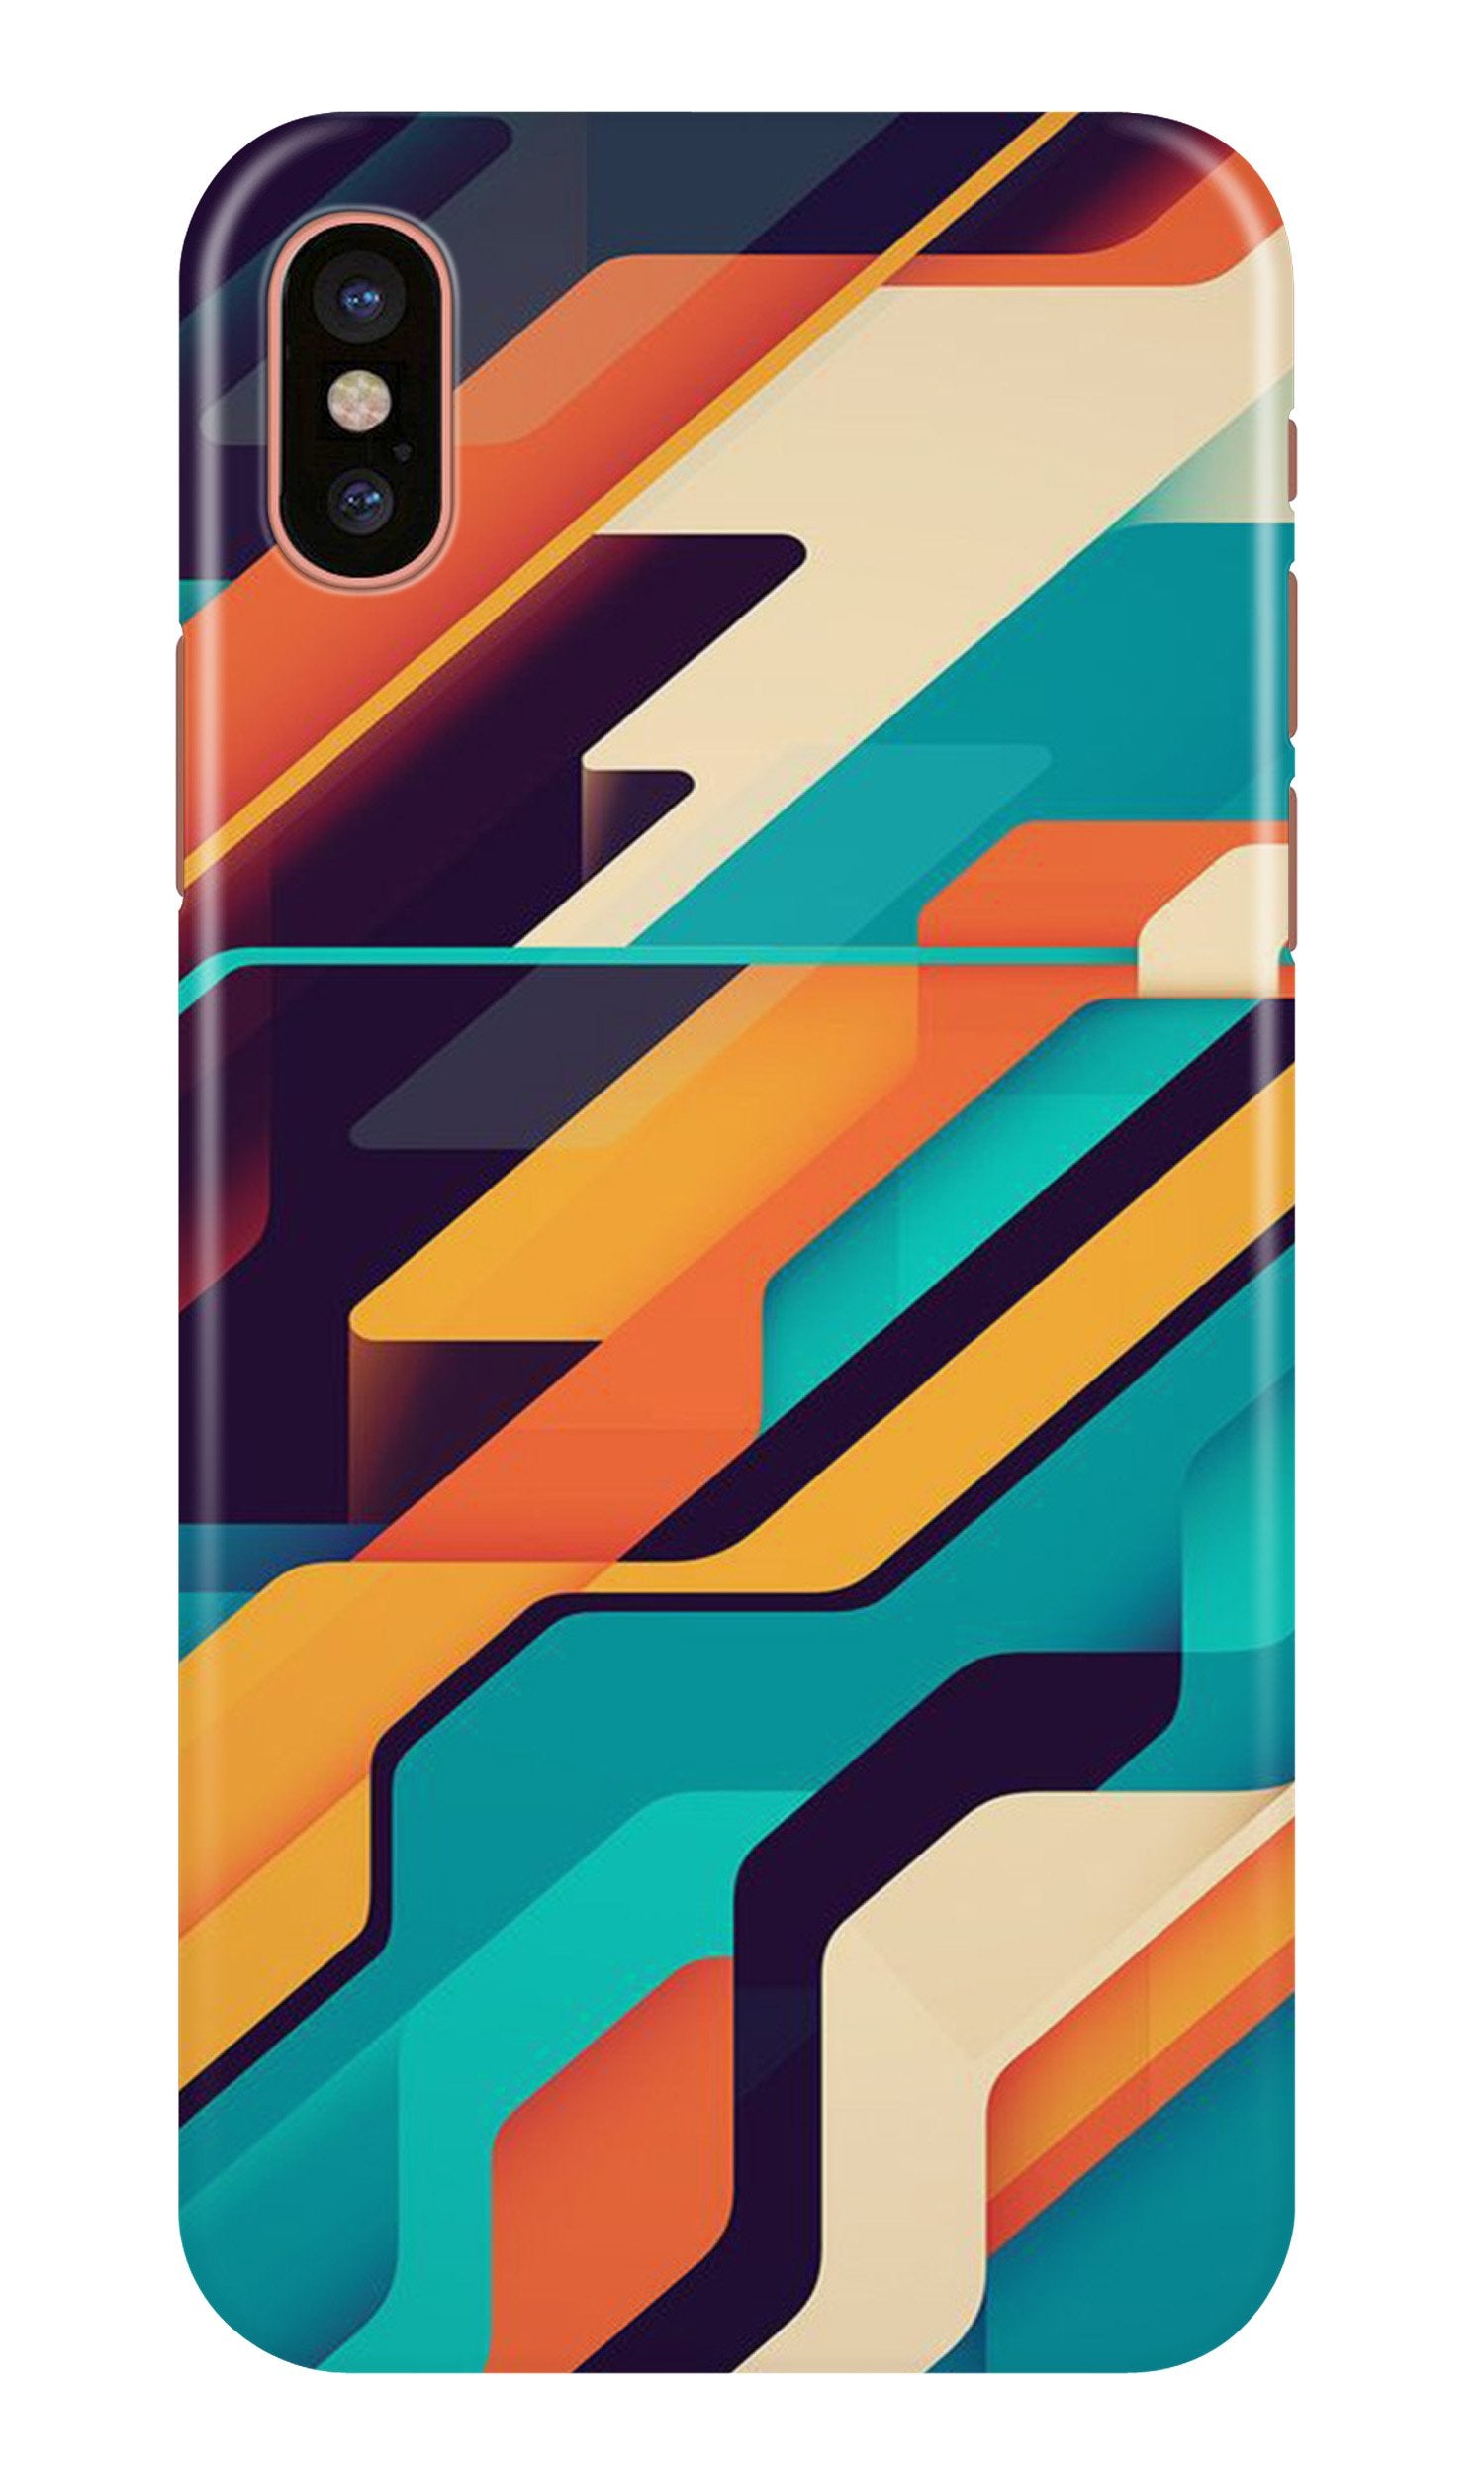 Modern Art Case for iPhone Xs Max (Design No. 233)